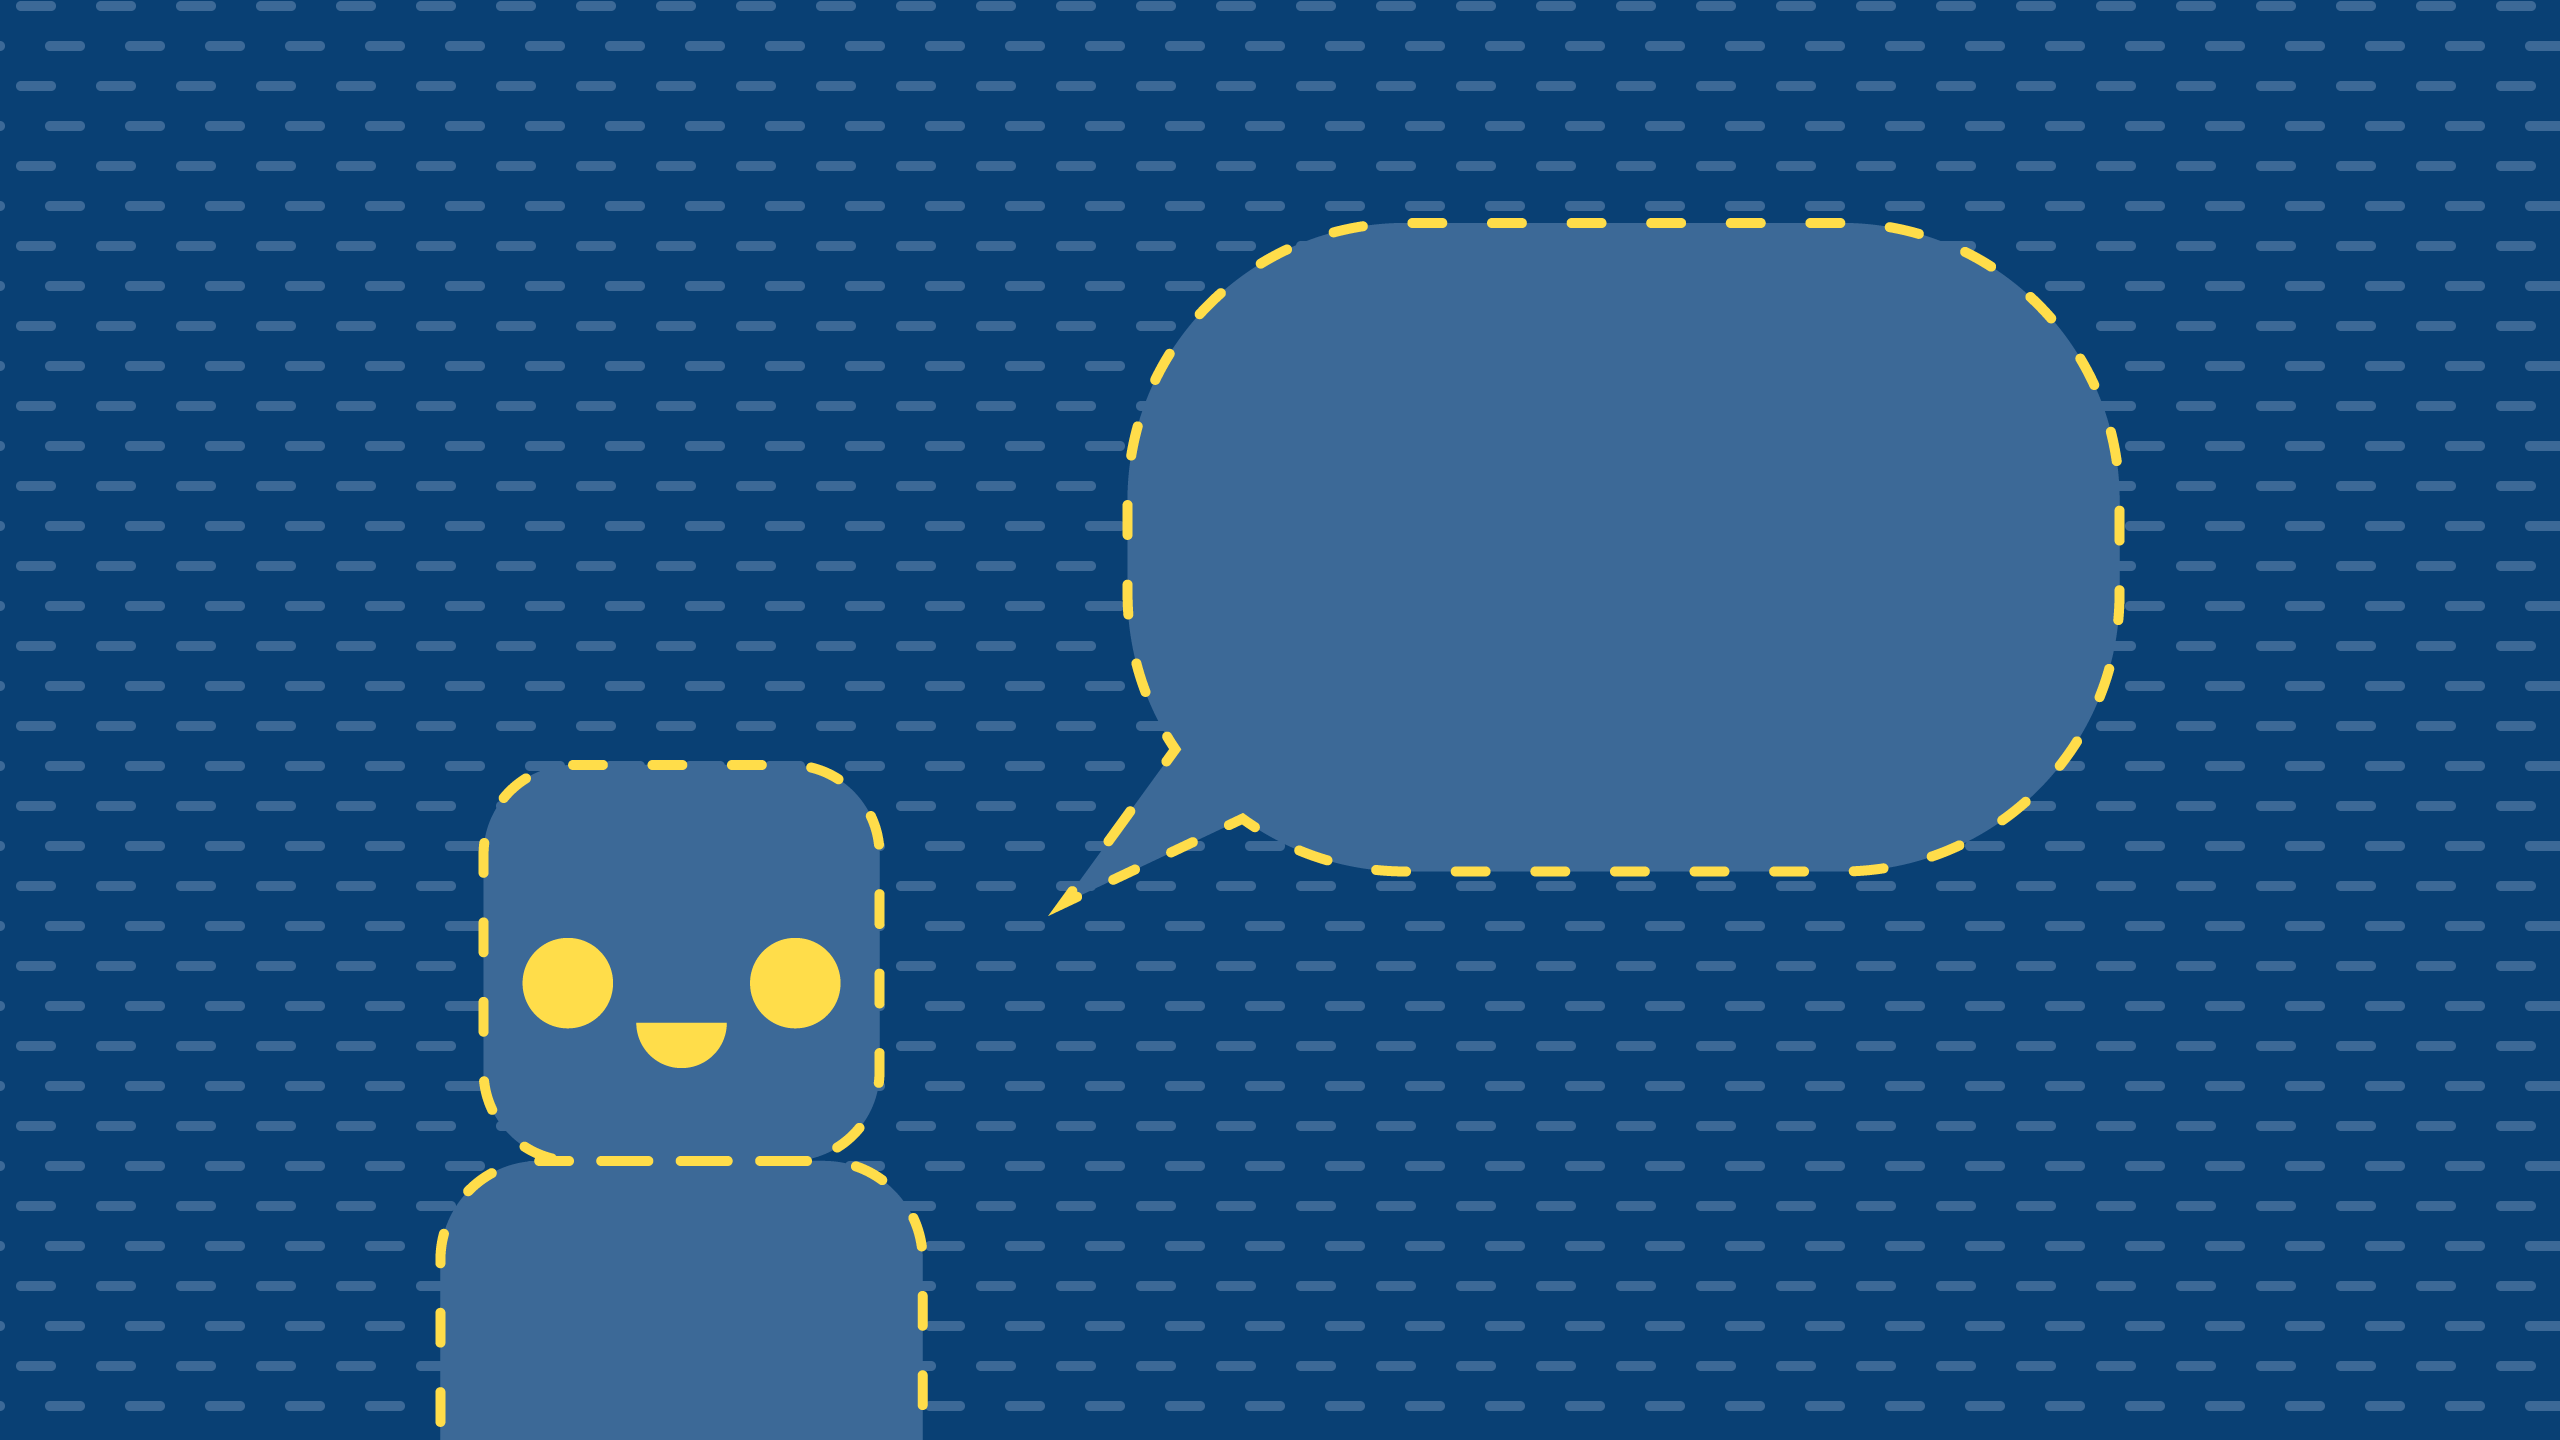 Conversational AI and the road ahead | TechCrunch